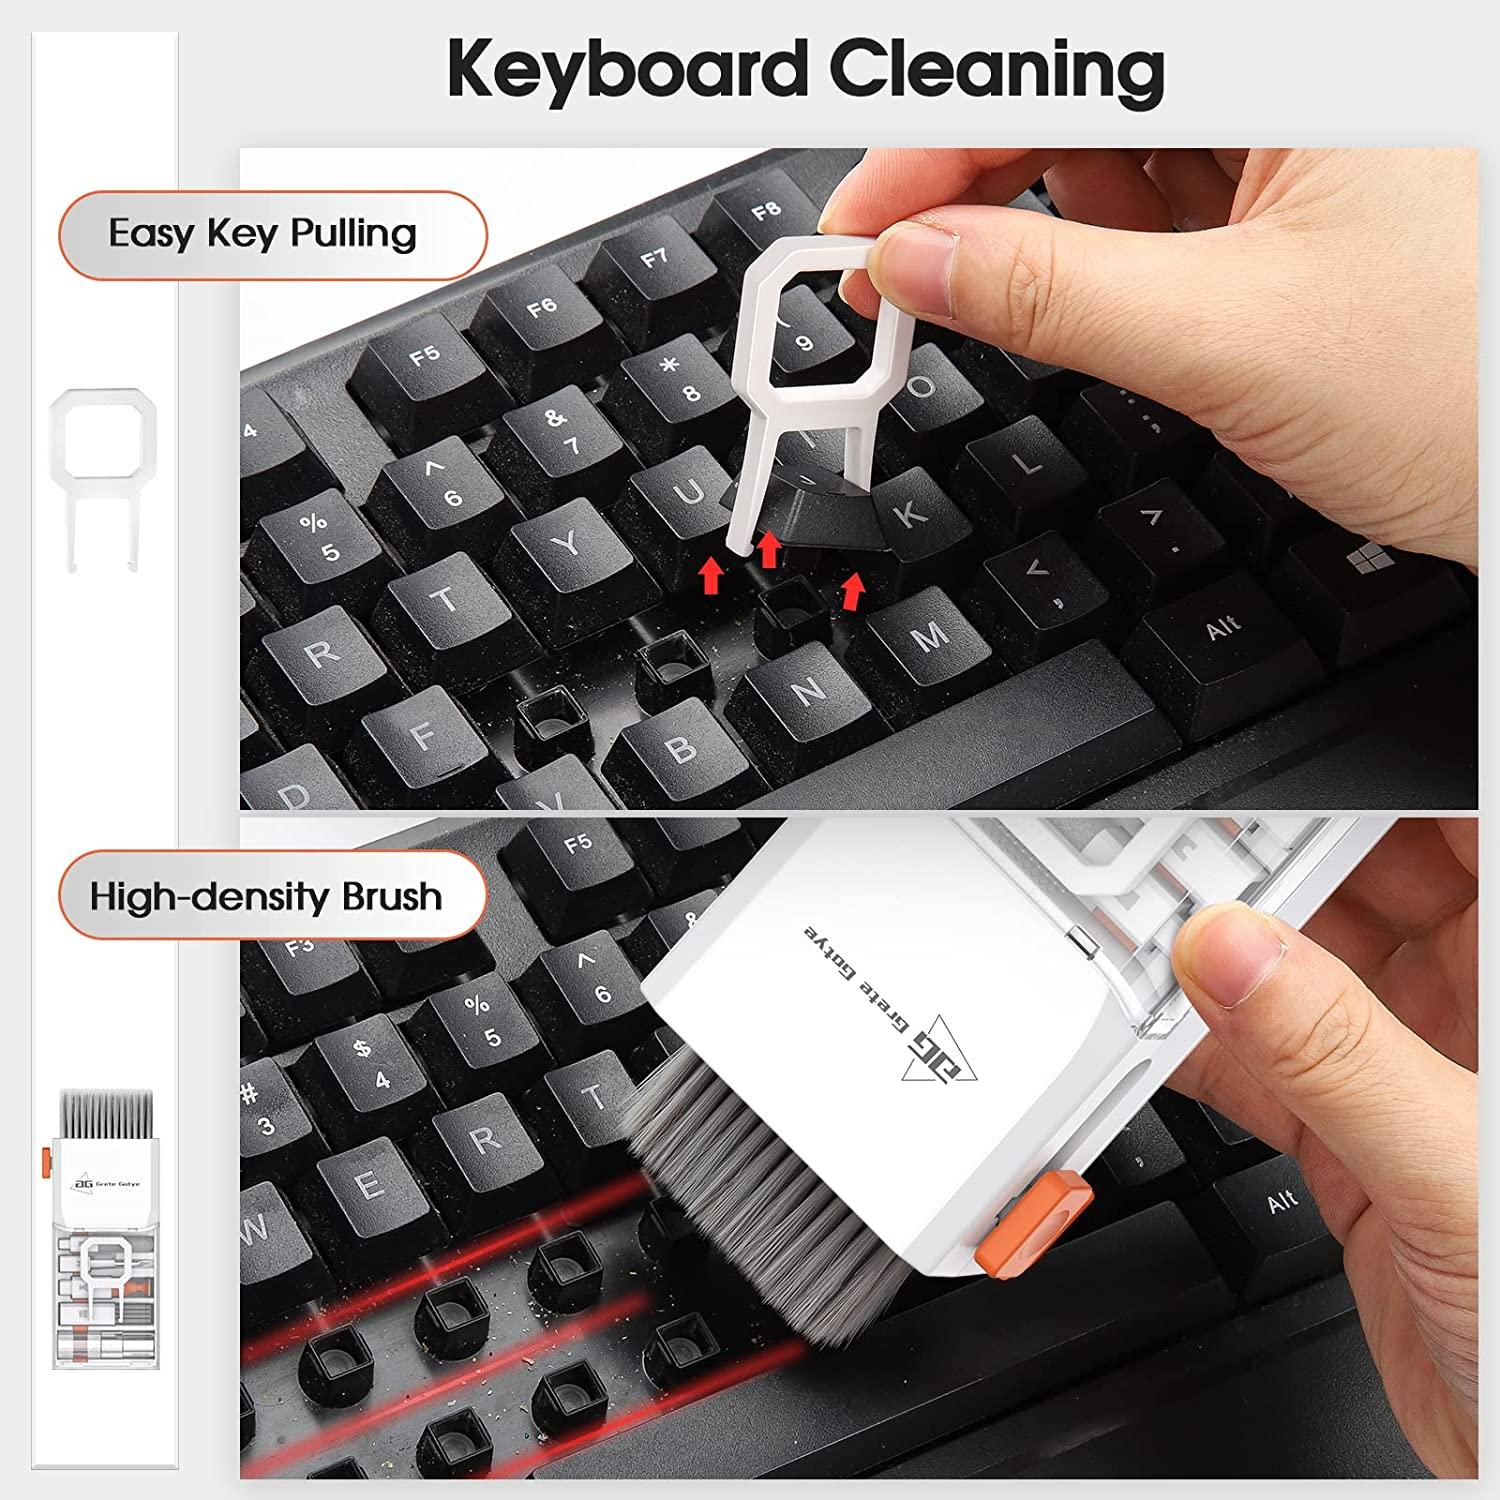 Keyboard Cleaner kit,2 Pack Upgrade 5-in-1 Multi-Function Keyboard &  Earphone Soft Brush Cleaning Tools Kit for Earphone  AirPods/Earbud/PC/Laptop/Computer/Bluetooth Earphones(with Key Puller) 